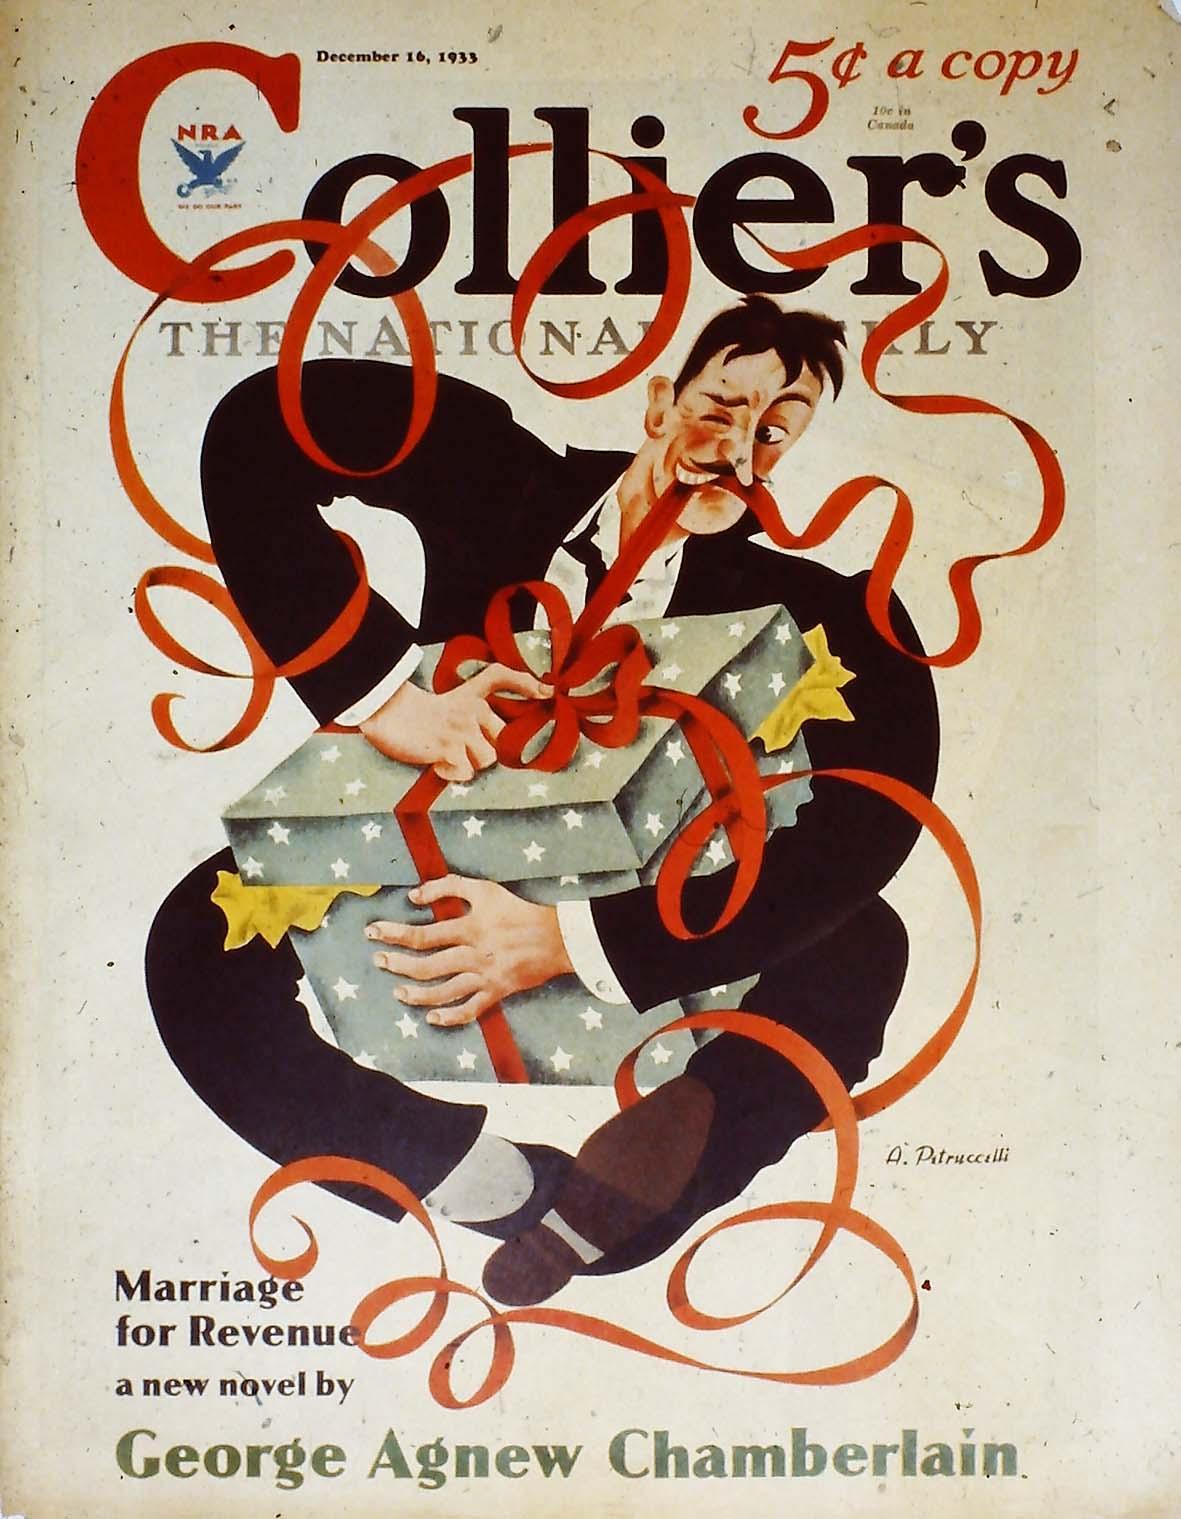 Original Painting. Colliers Cover Published American Scene Christmas Modern 

Antonio Petruccelli (1907 - 1994)
Man with Ribbon
Colliers published, December 16, 1933
17 1/2 X 13 3/4 (sight) inches
Gouache on board
Signed lower